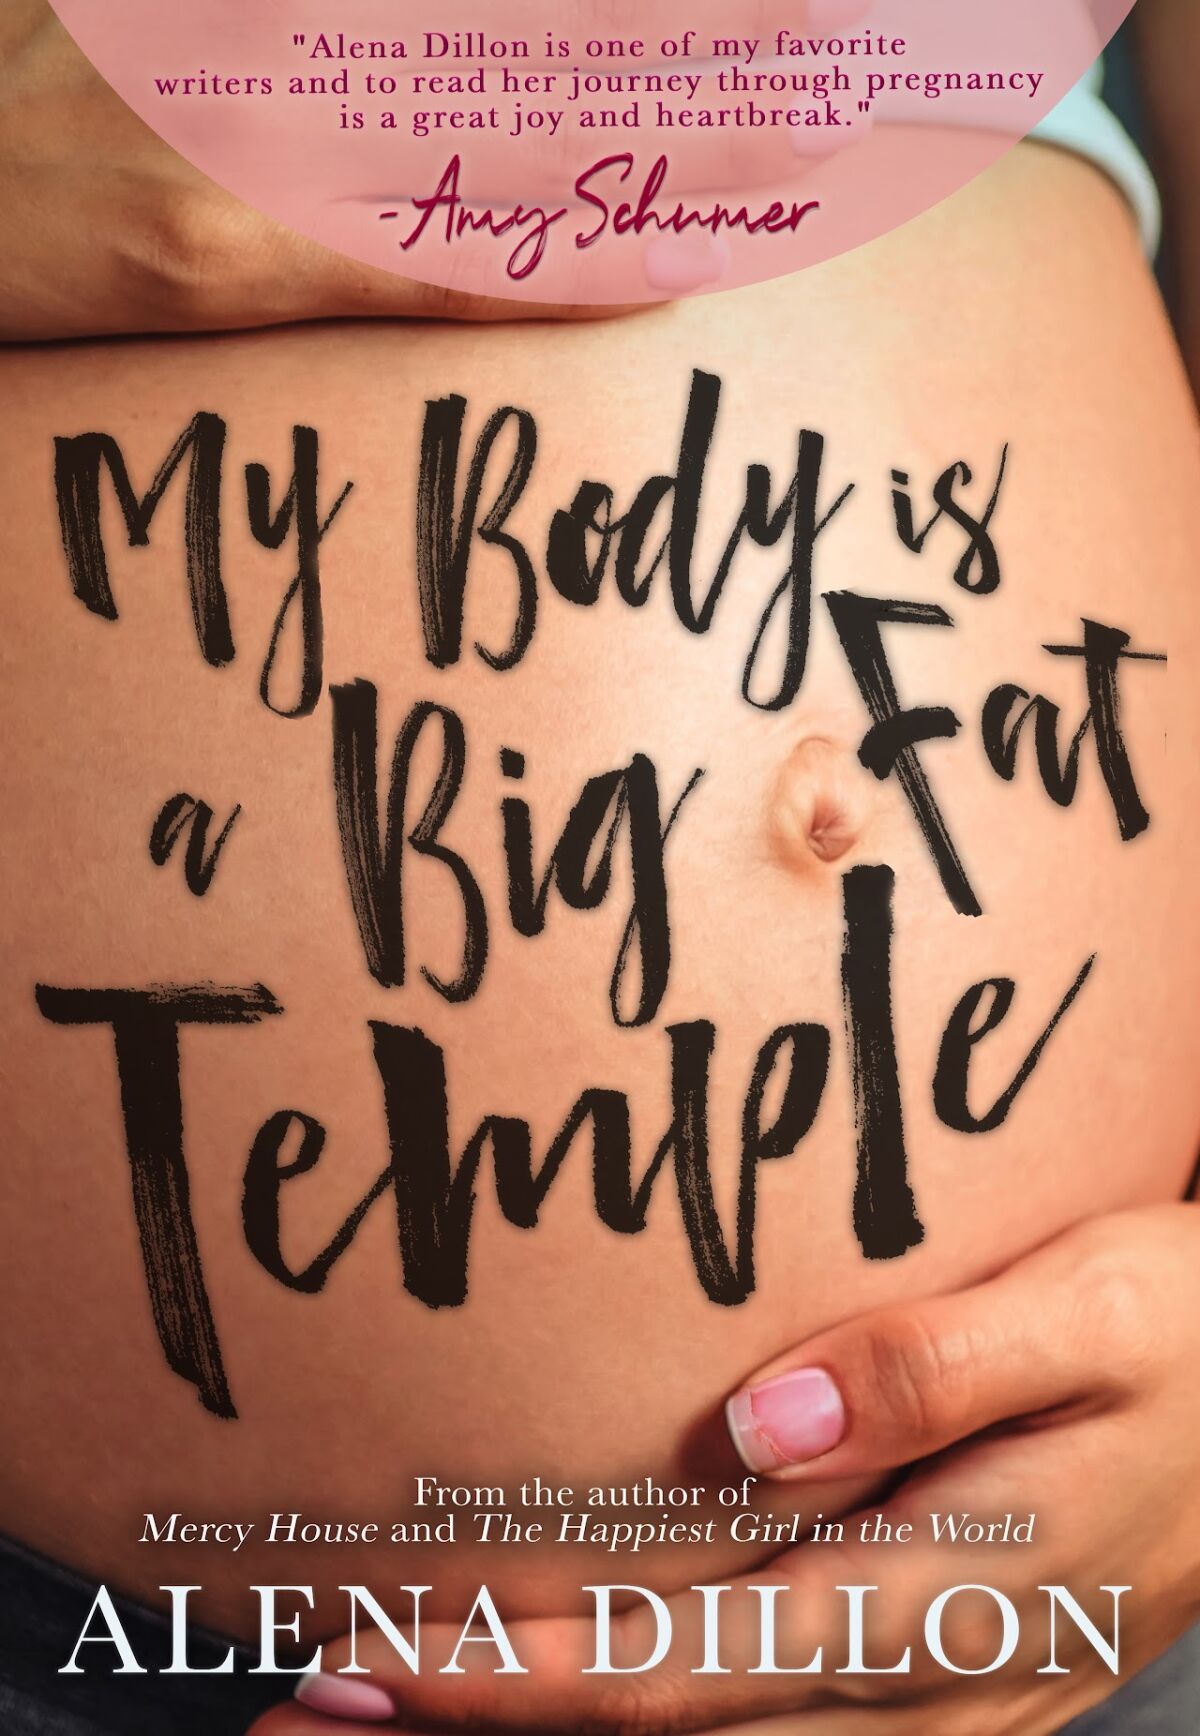 The cover of ‘My Body Is A Big Fat Temple’ by Alena Dillon